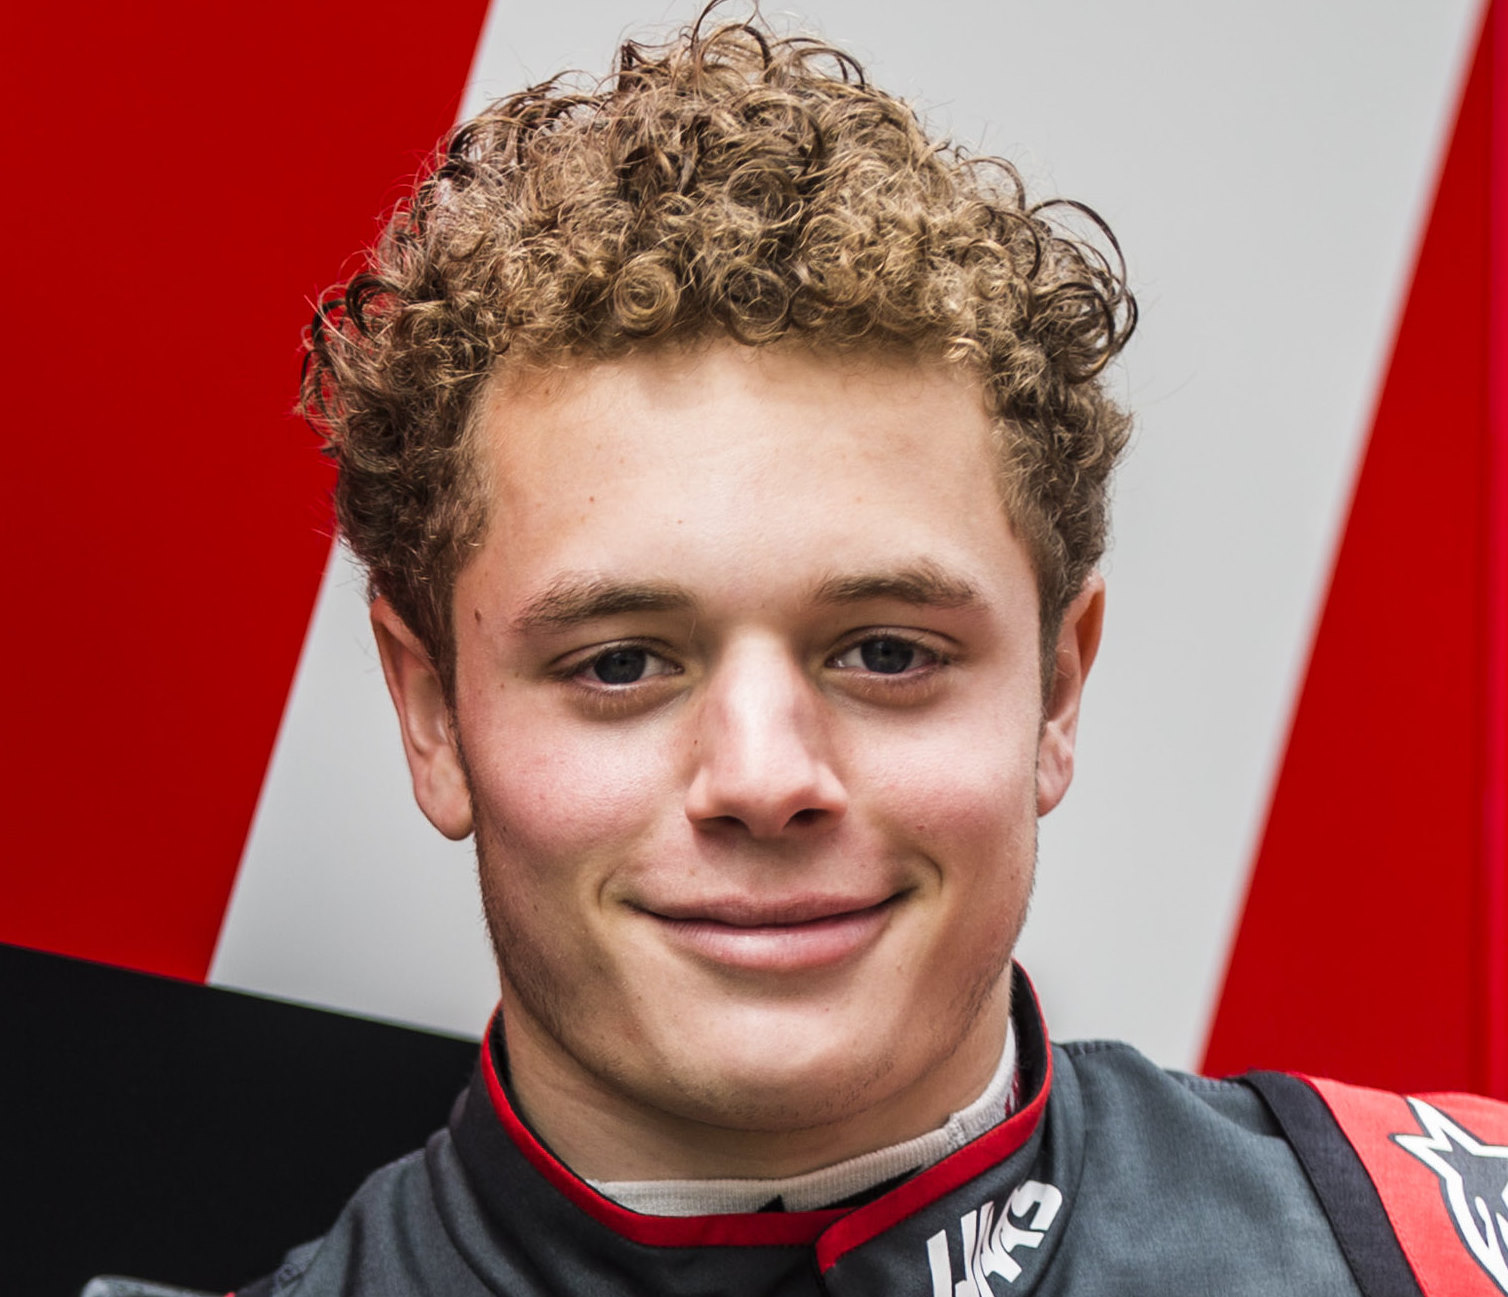 GP3 backmarker Santino Ferrucci has bought another test with the Haas team